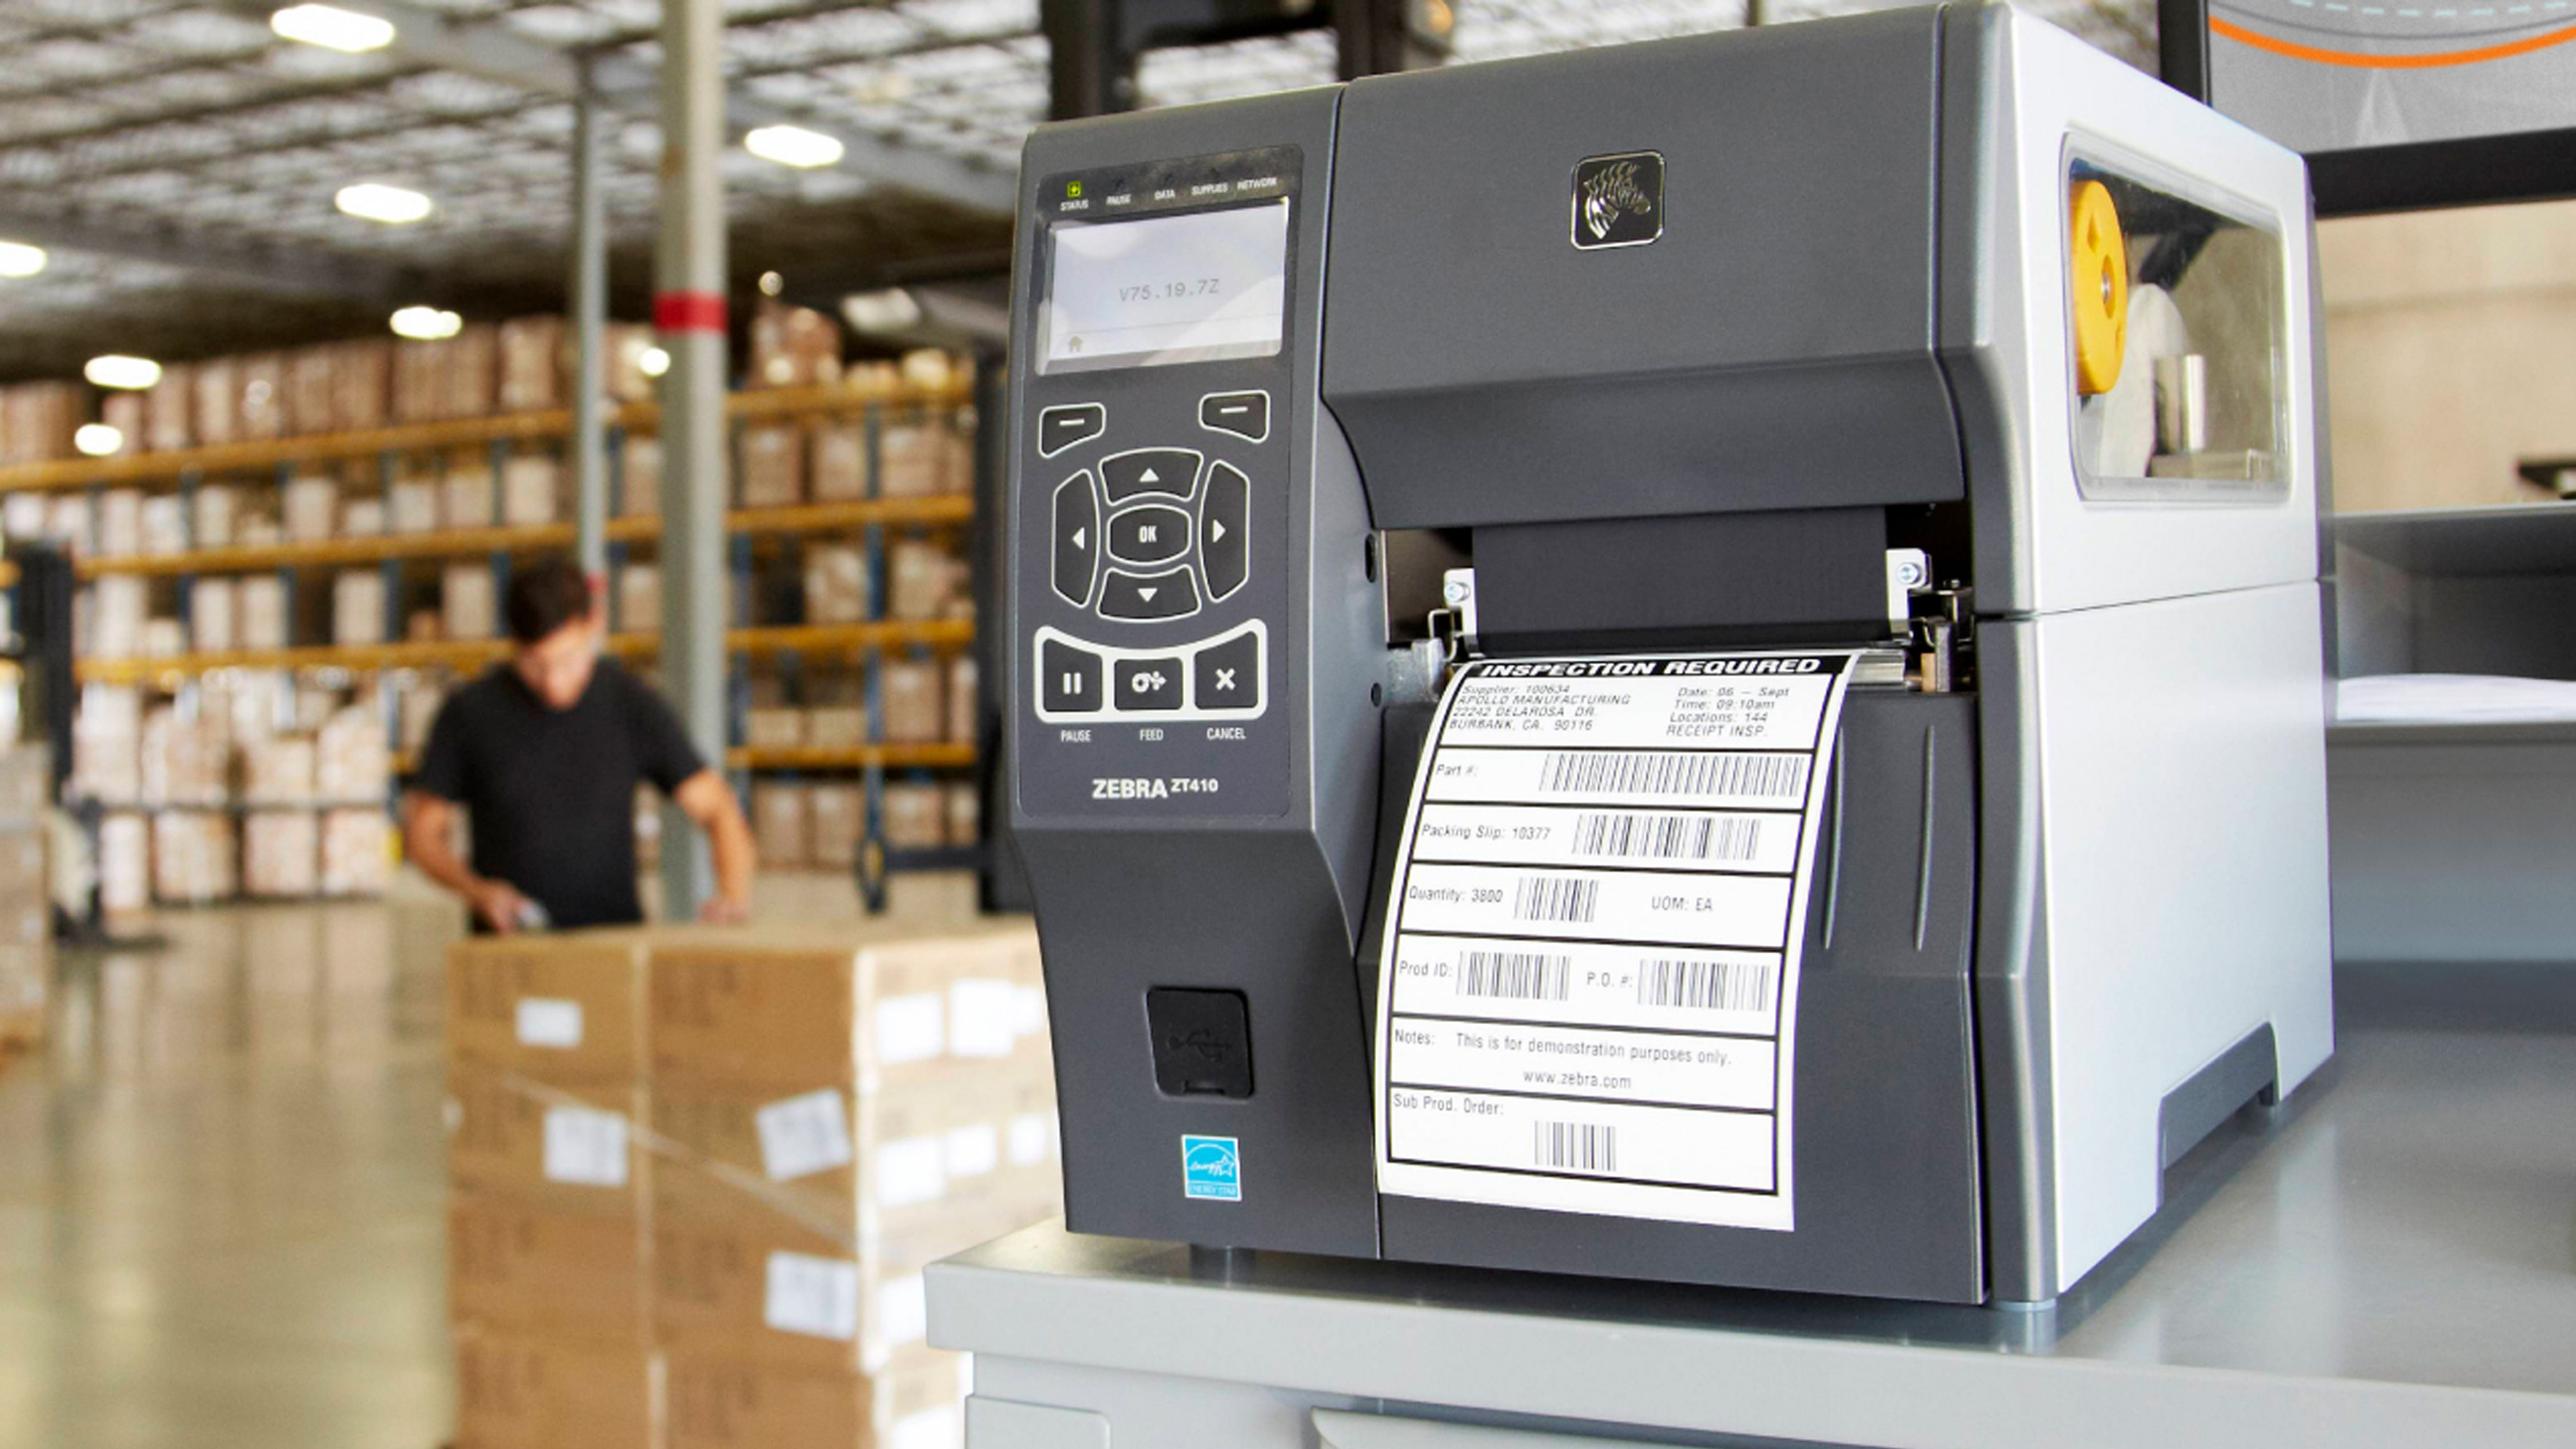 A Zebra industrial printer backed by Managed Print Services (MPS) allows warehouses to gain control and visibility of their print fleet. 